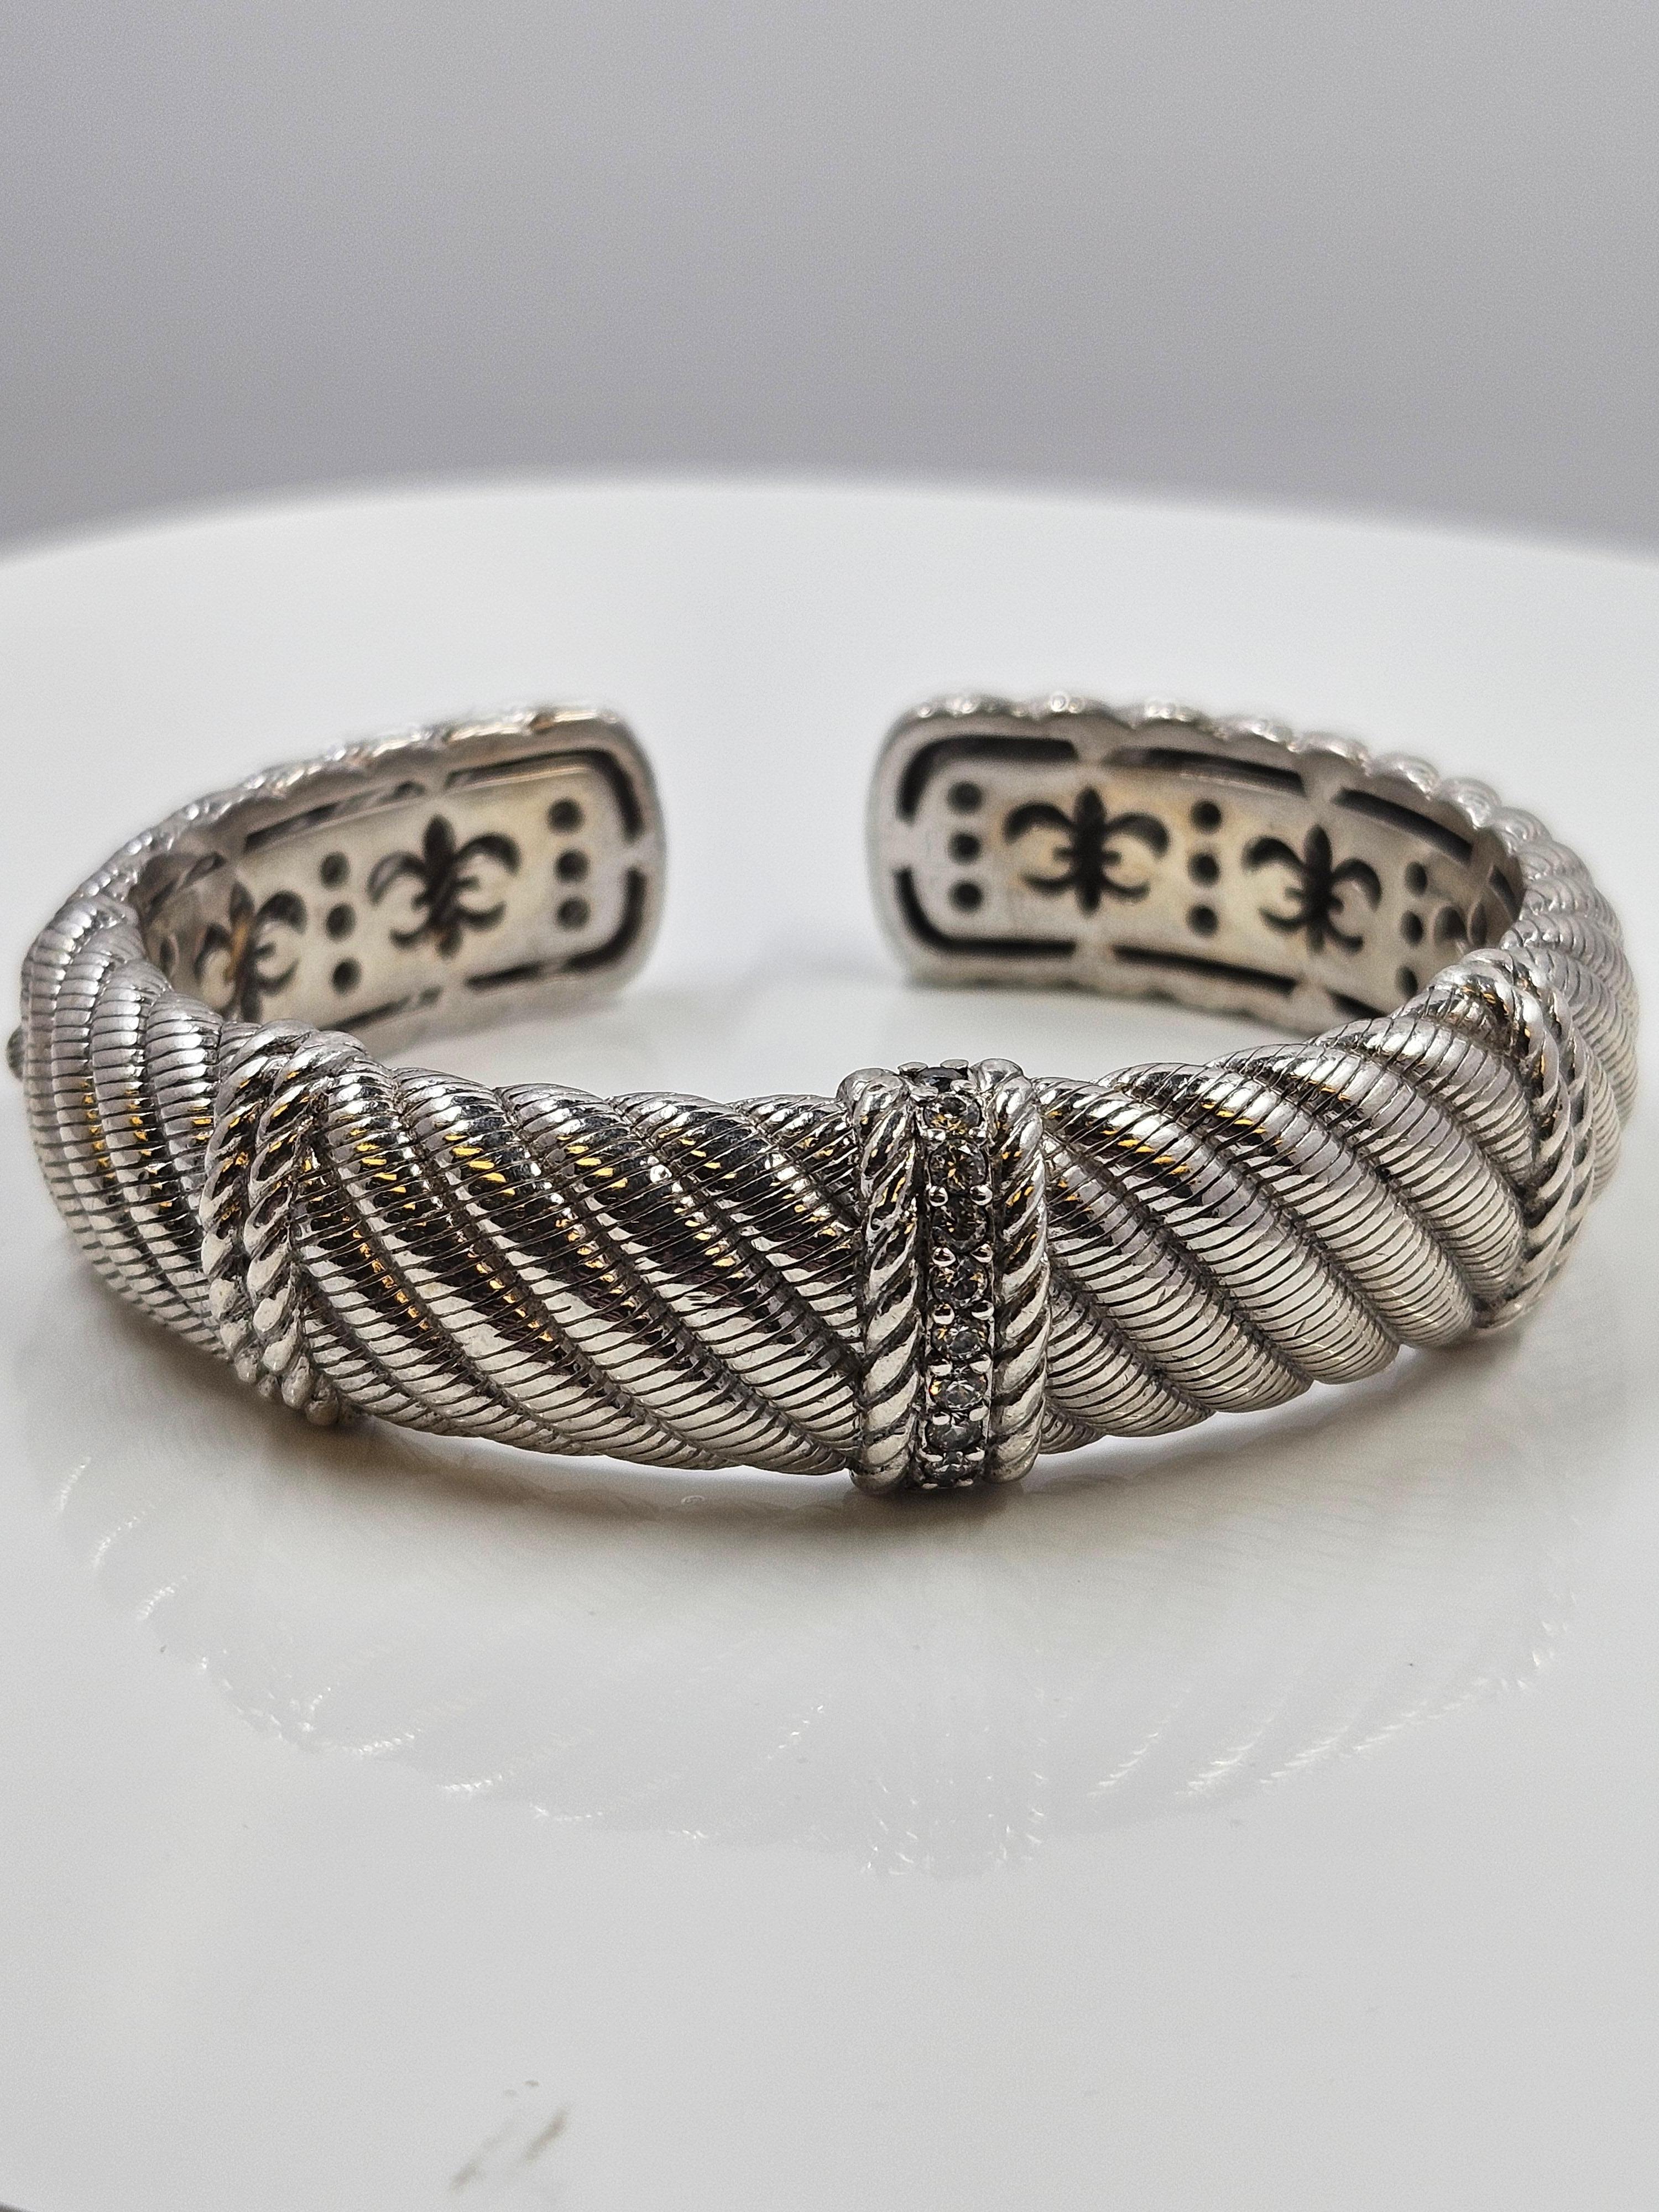 Judith Ripka 925 sterling silver and cz chunky hinged cuff bracelet. 64mm diameter and 17mm wide band.